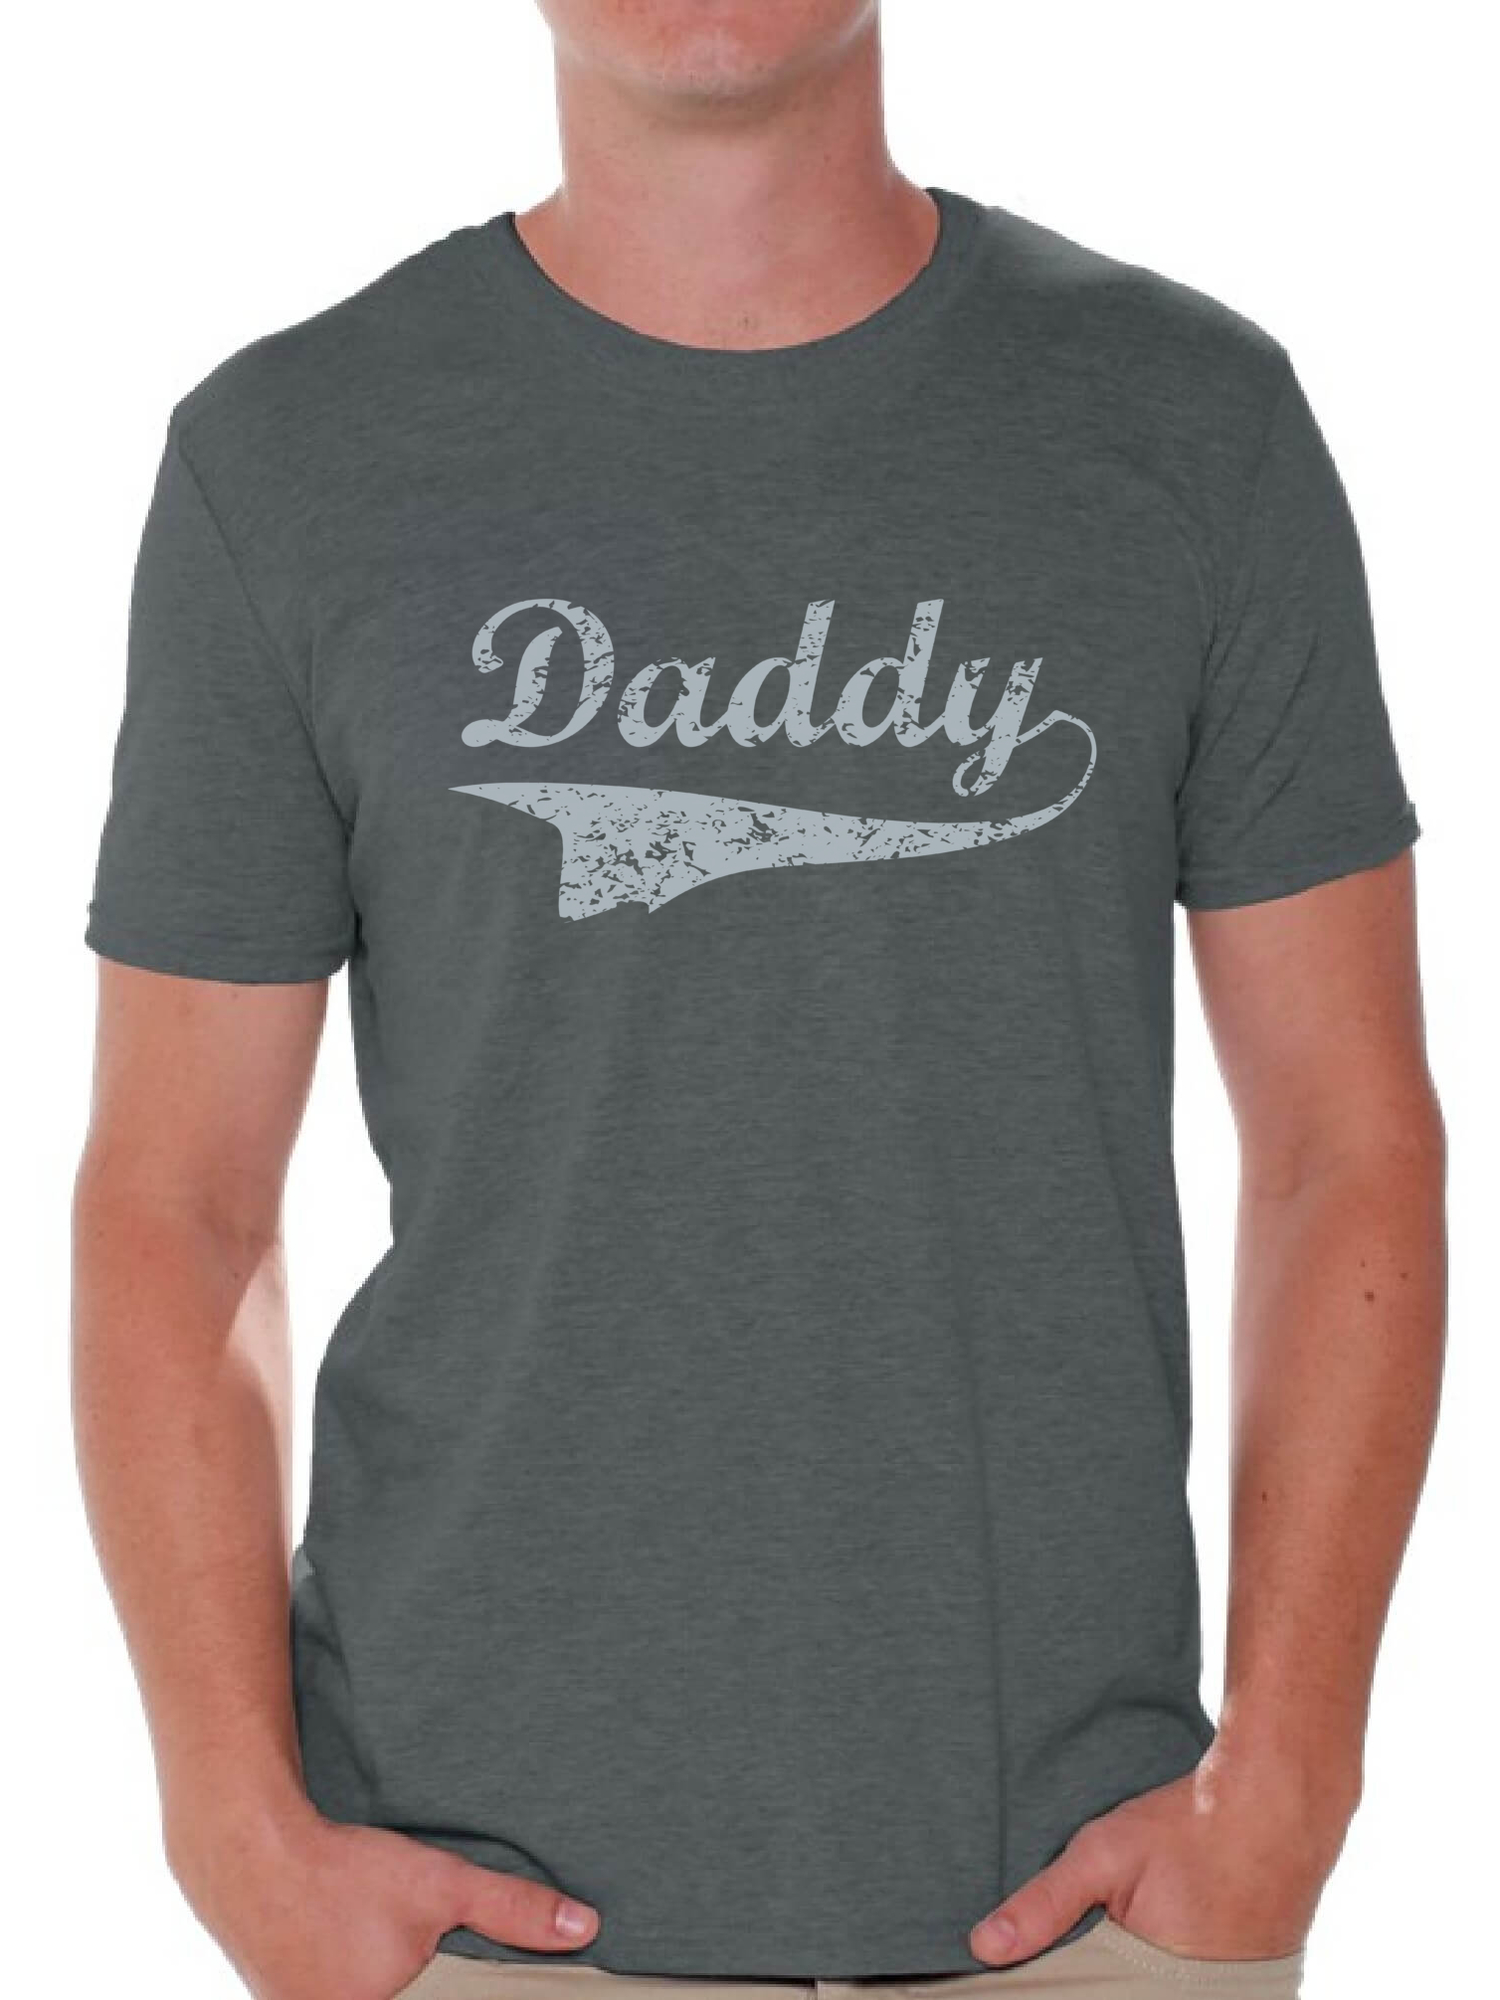 Awkward Styles Men's Daddy Graphic T-shirt Tops Vintage Father`s Day Gift for Dad - image 1 of 4